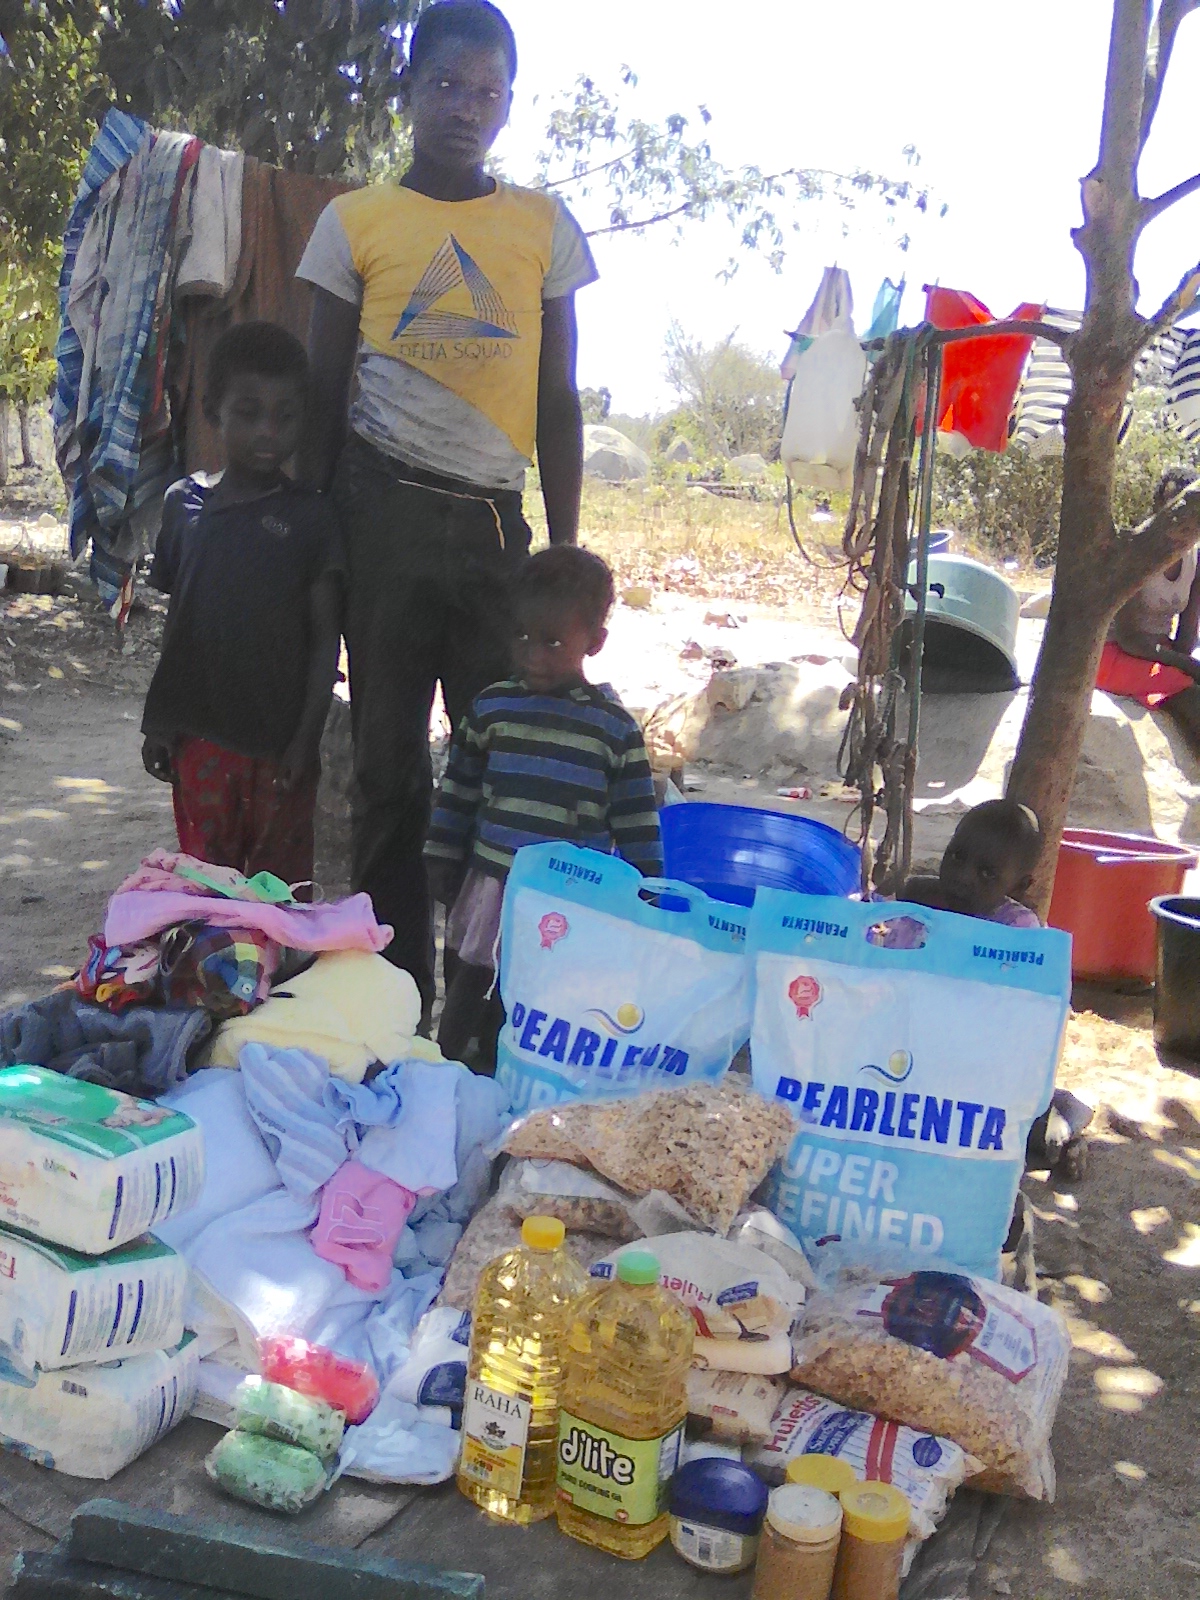 The family of 7 receives basic food and supplies from MRCH